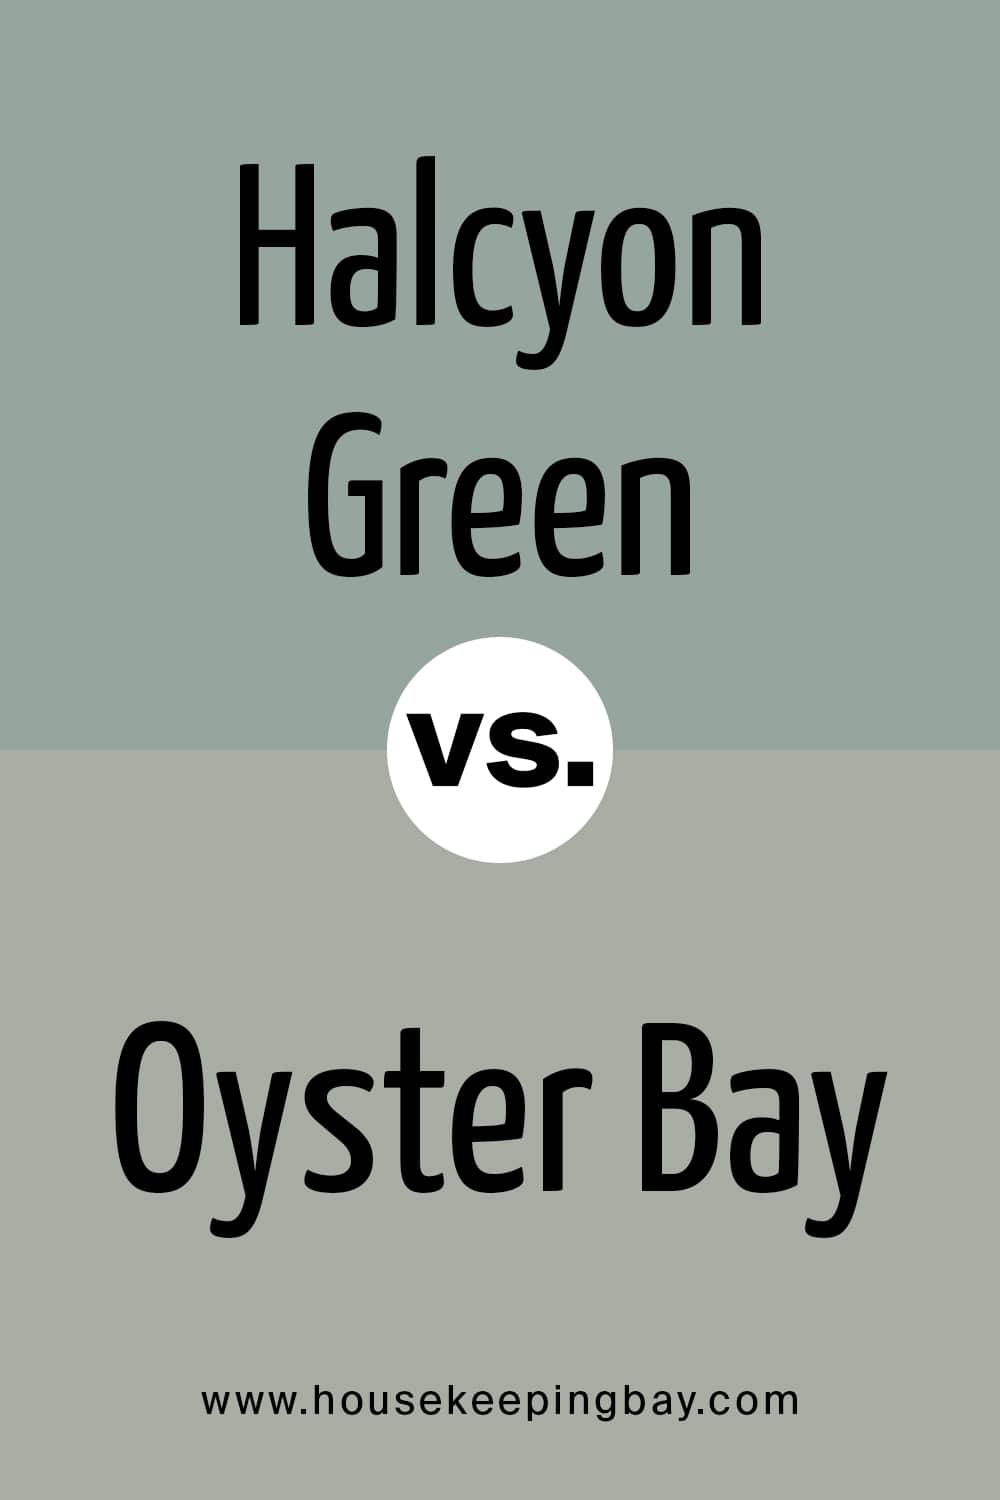 Halcyon Green VS Oyster Bay